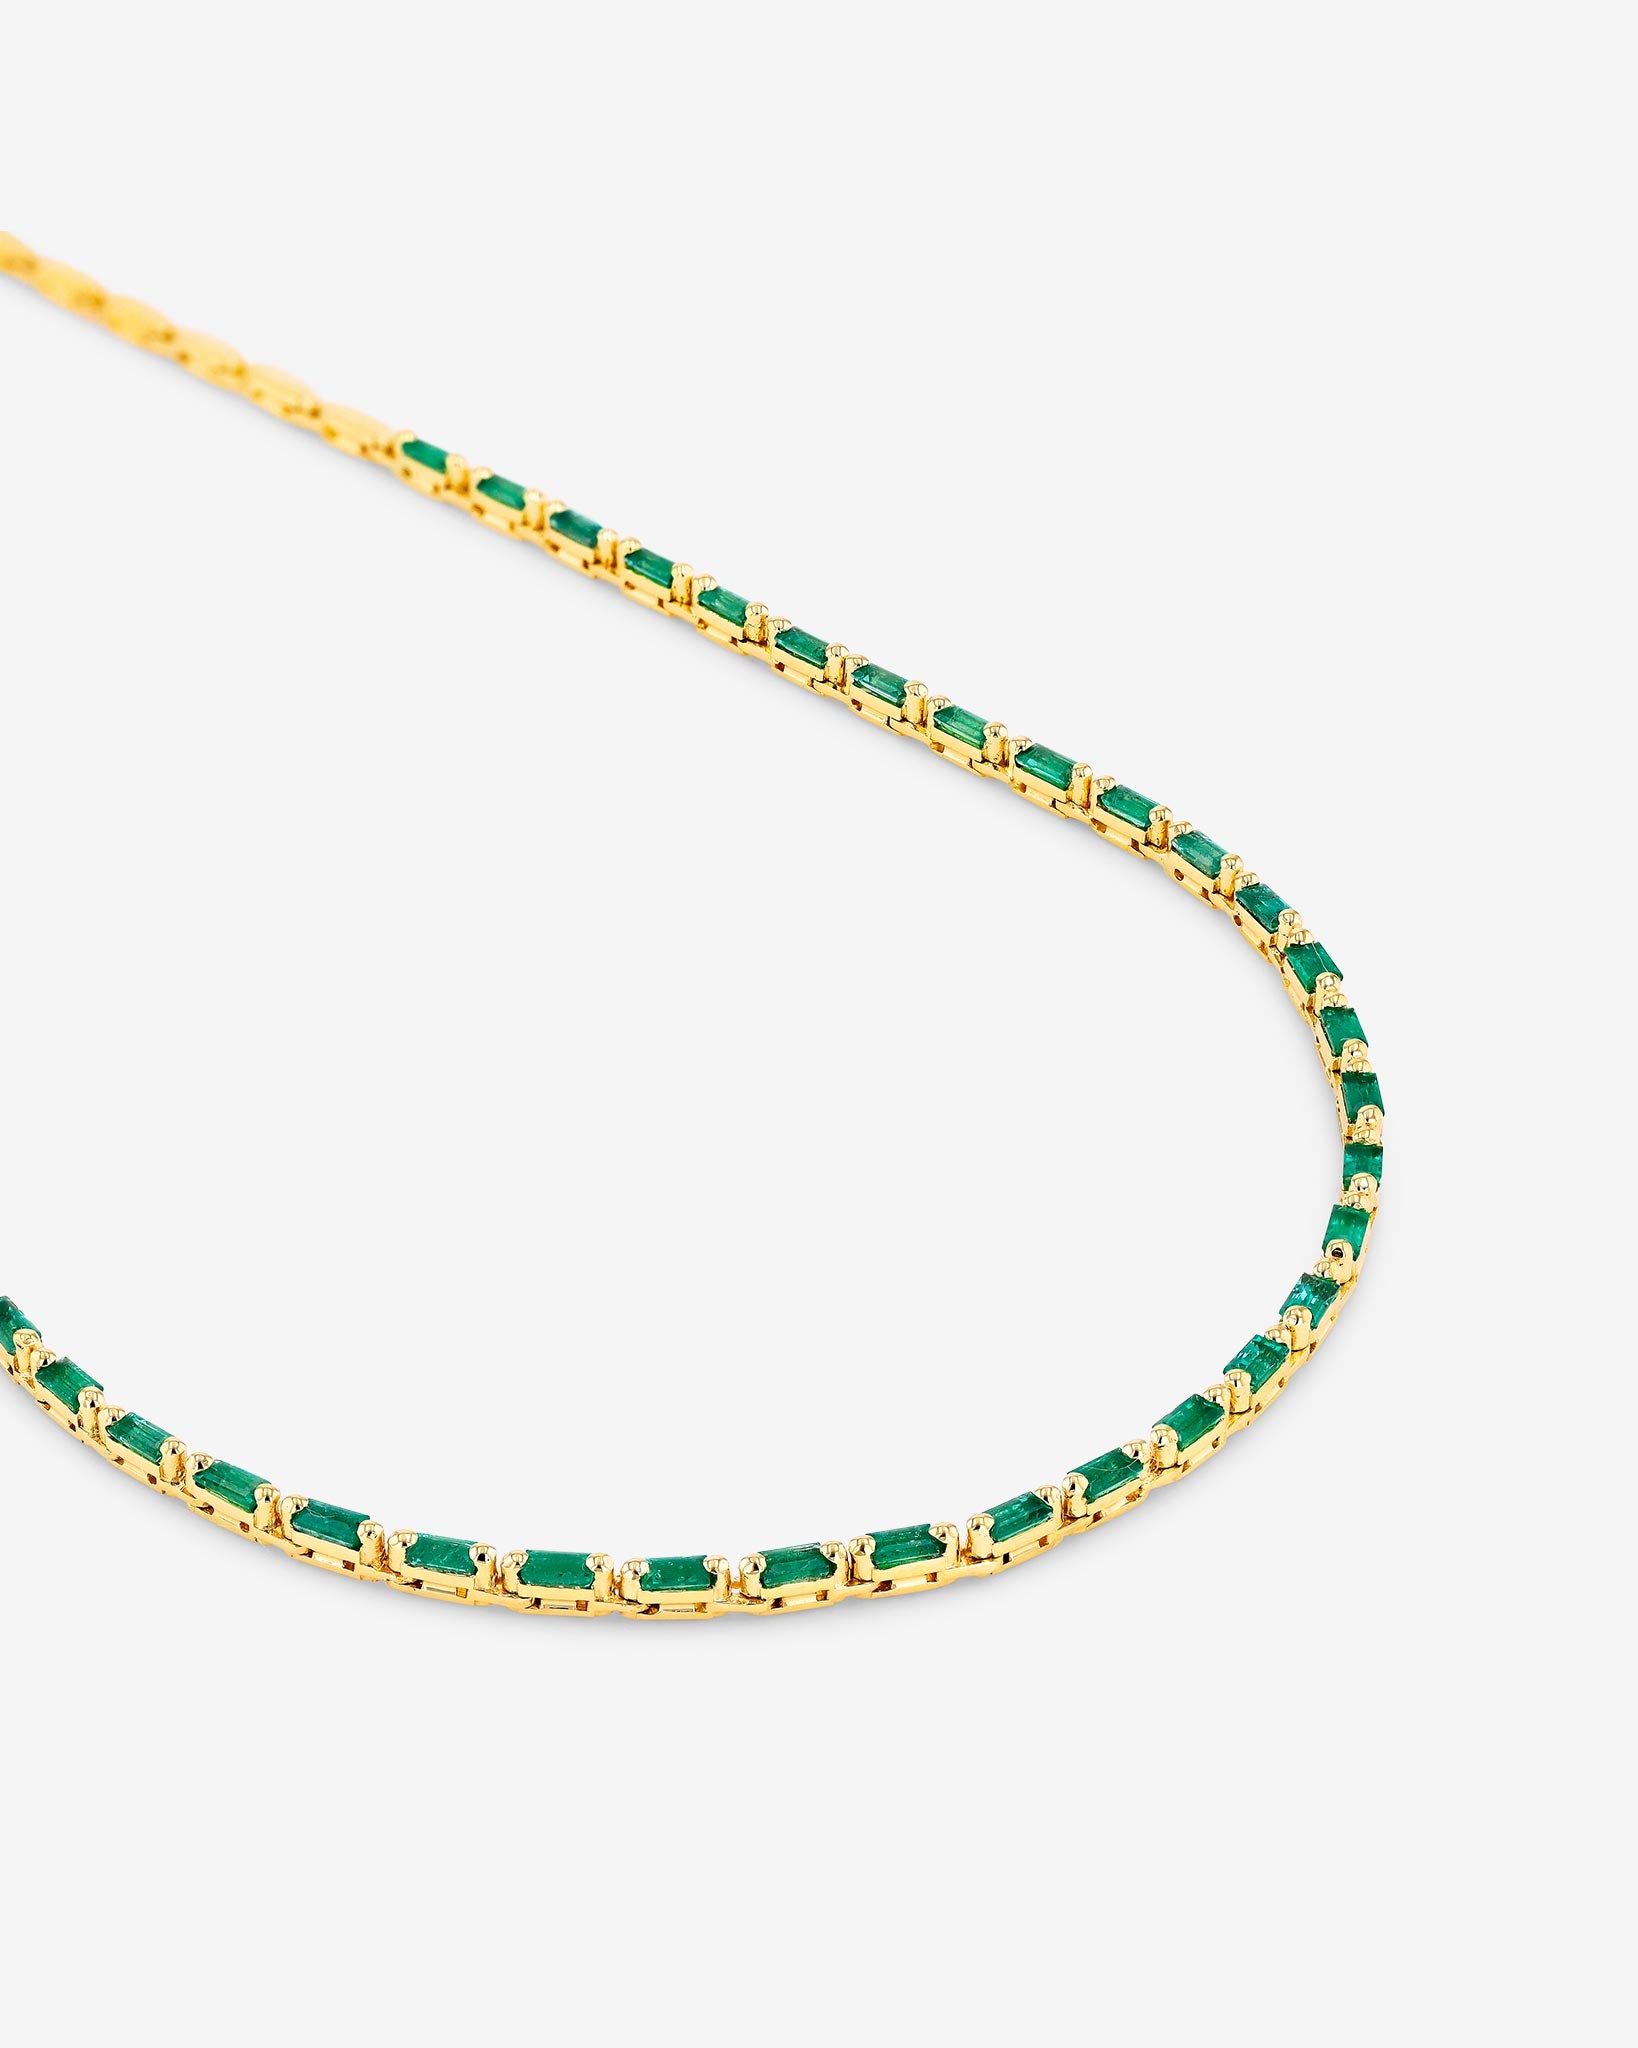 Suzanne Kalan Linear Half Emerald Tennis Necklace in 18k yellow gold